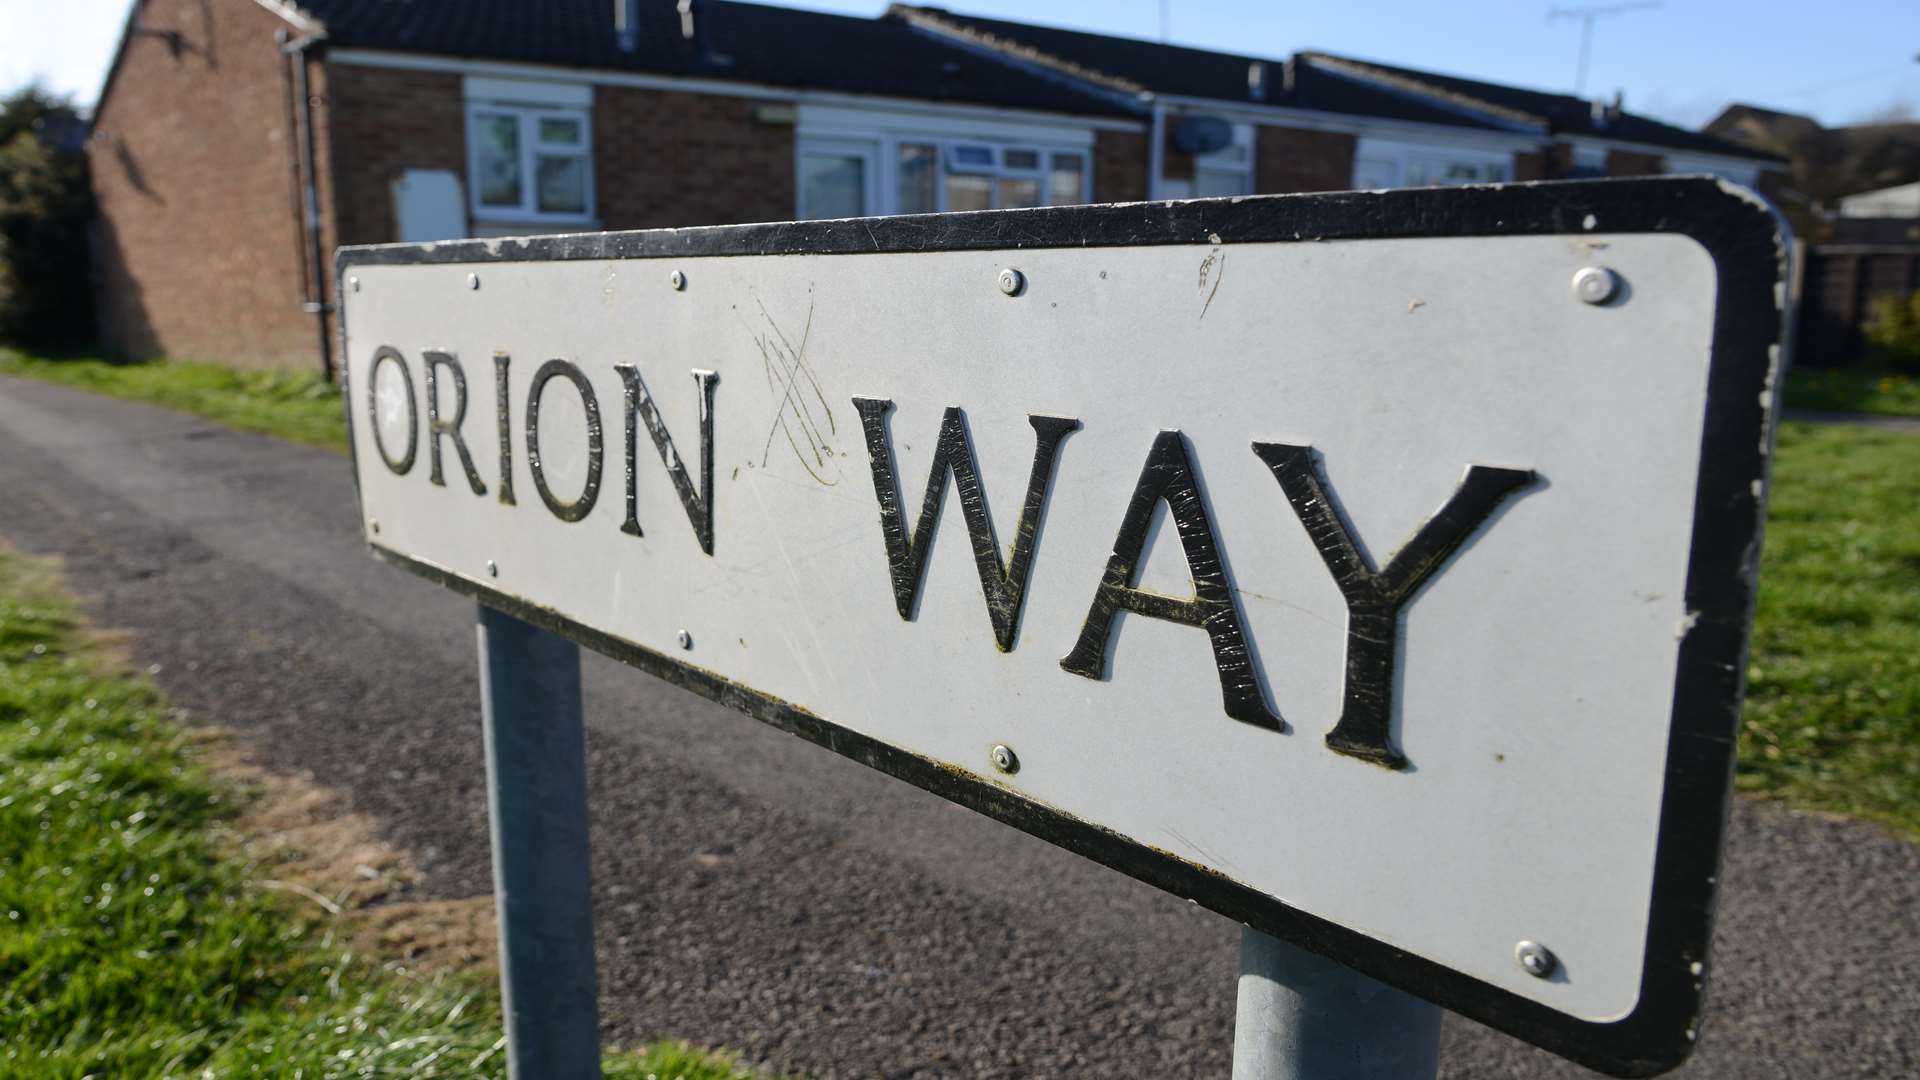 The alleged burglary happened in Orion Way, Willesborough